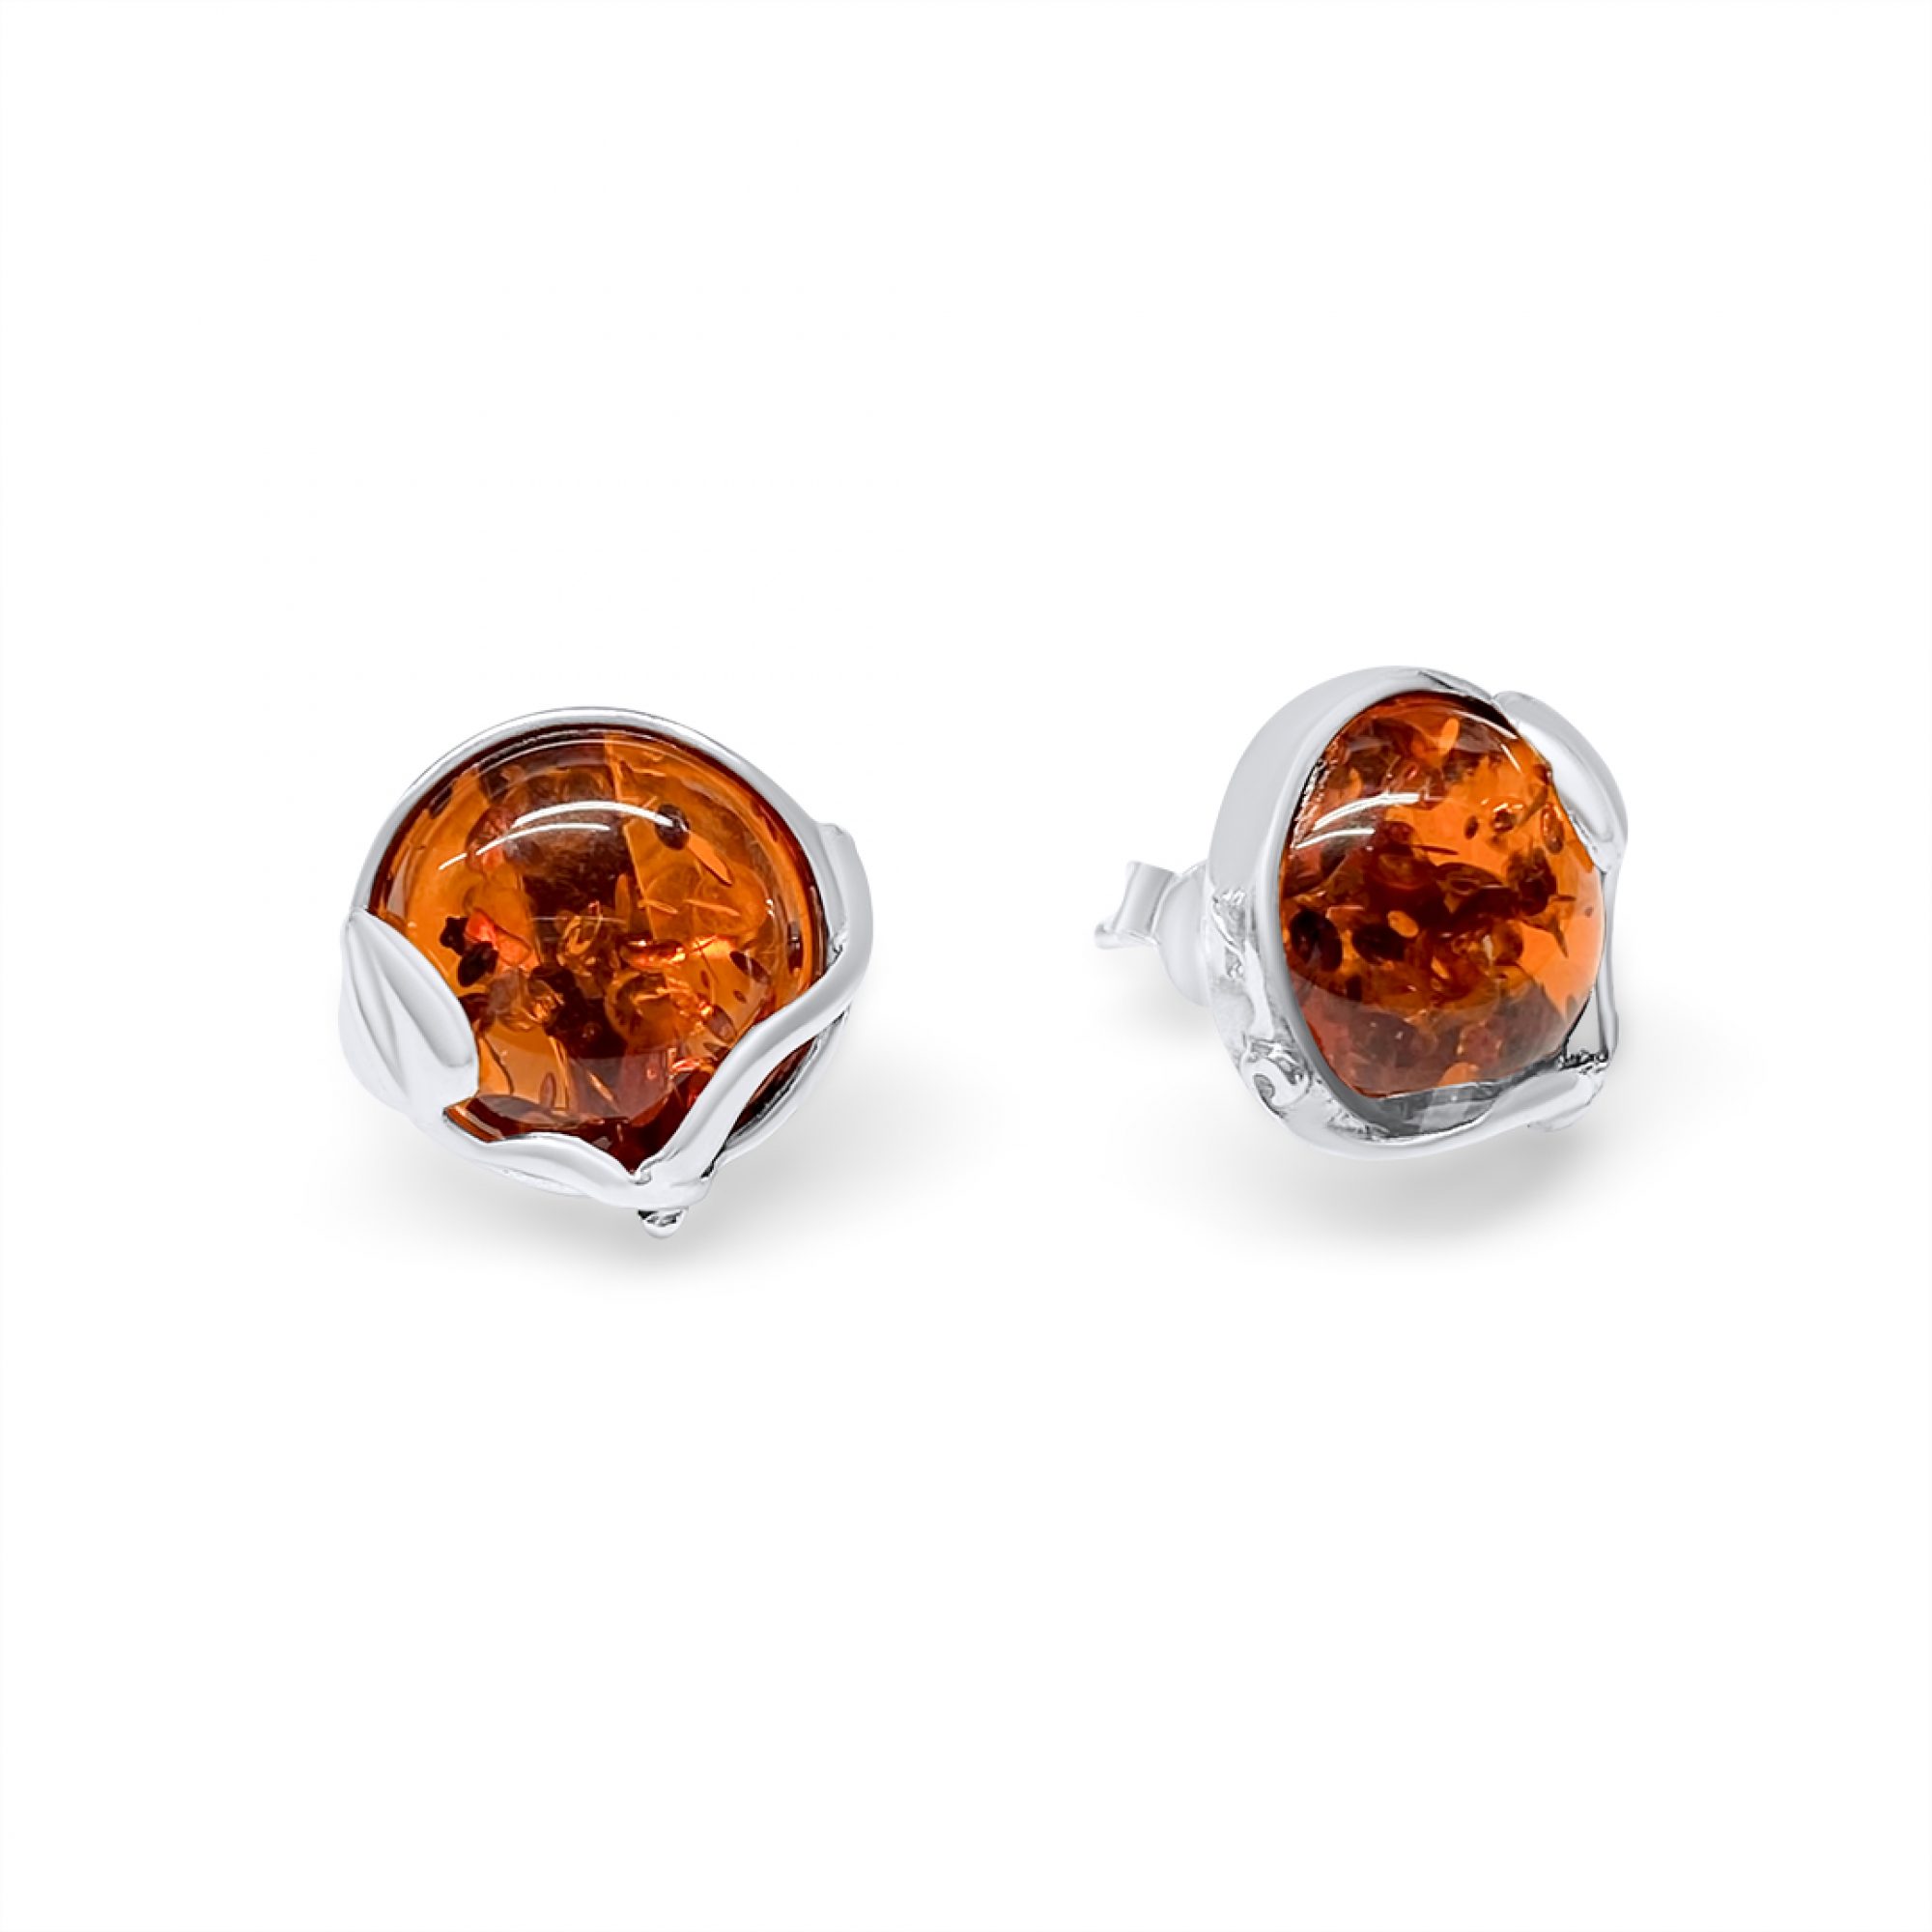 Earrings with amber stones